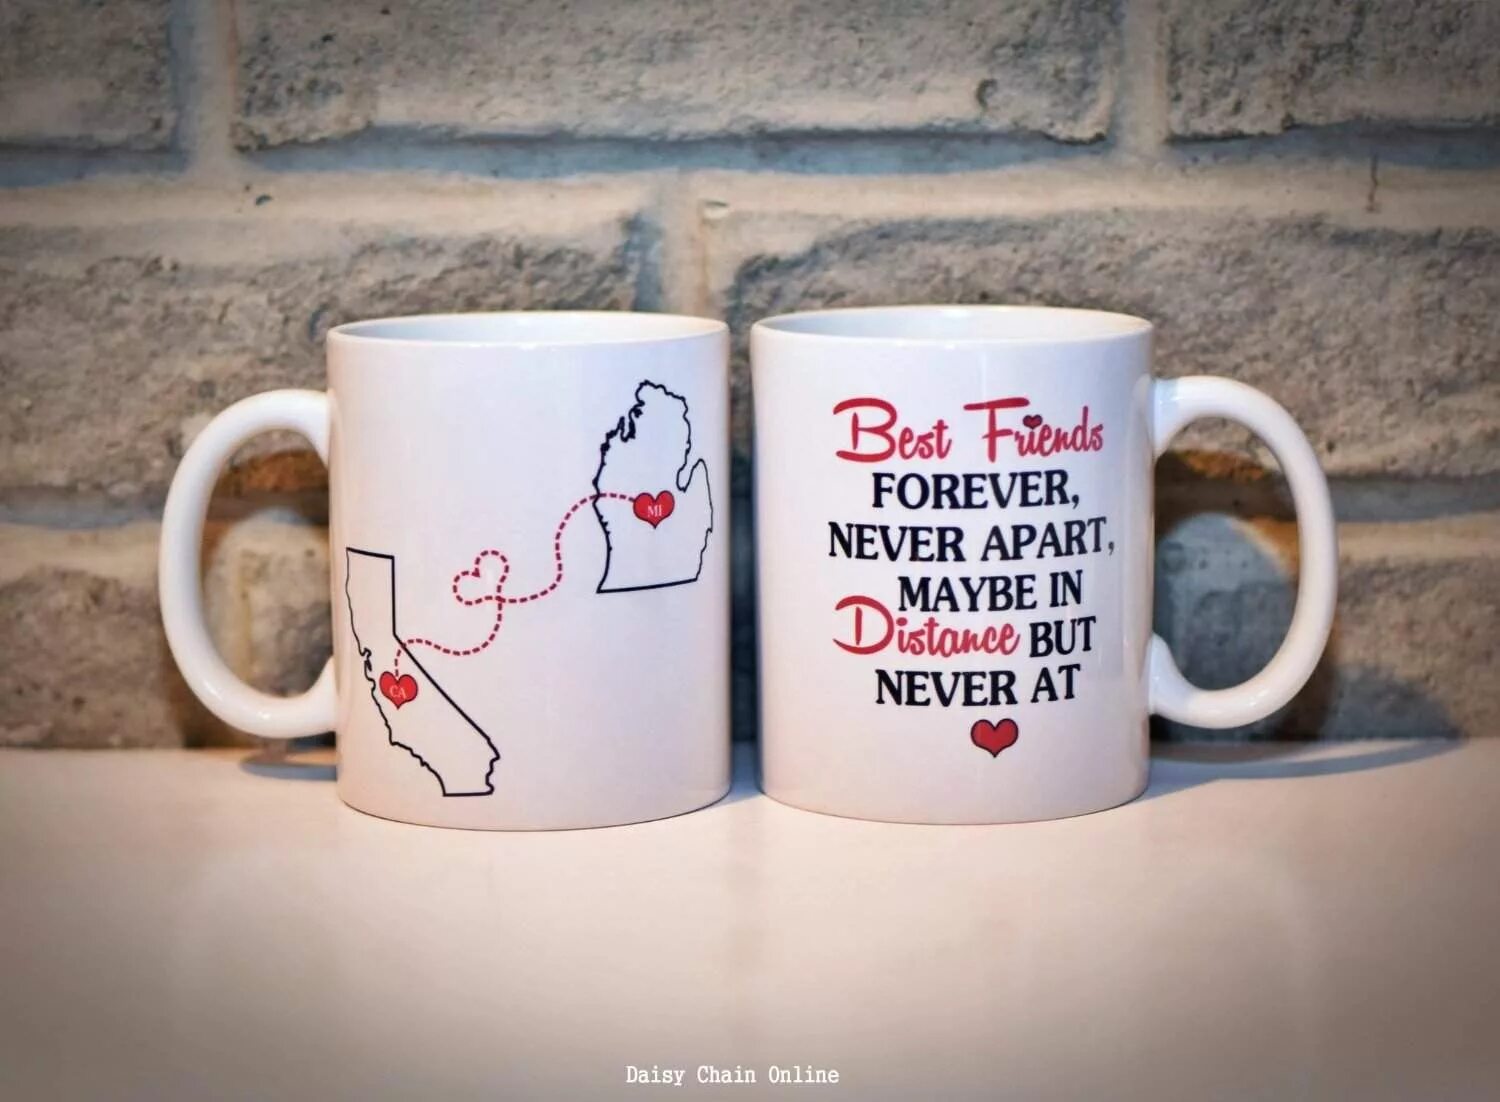 Friend lives far. Кружка Мисс босс. Кружки all for the best. Best Mugs for Gift. To Mug someone.